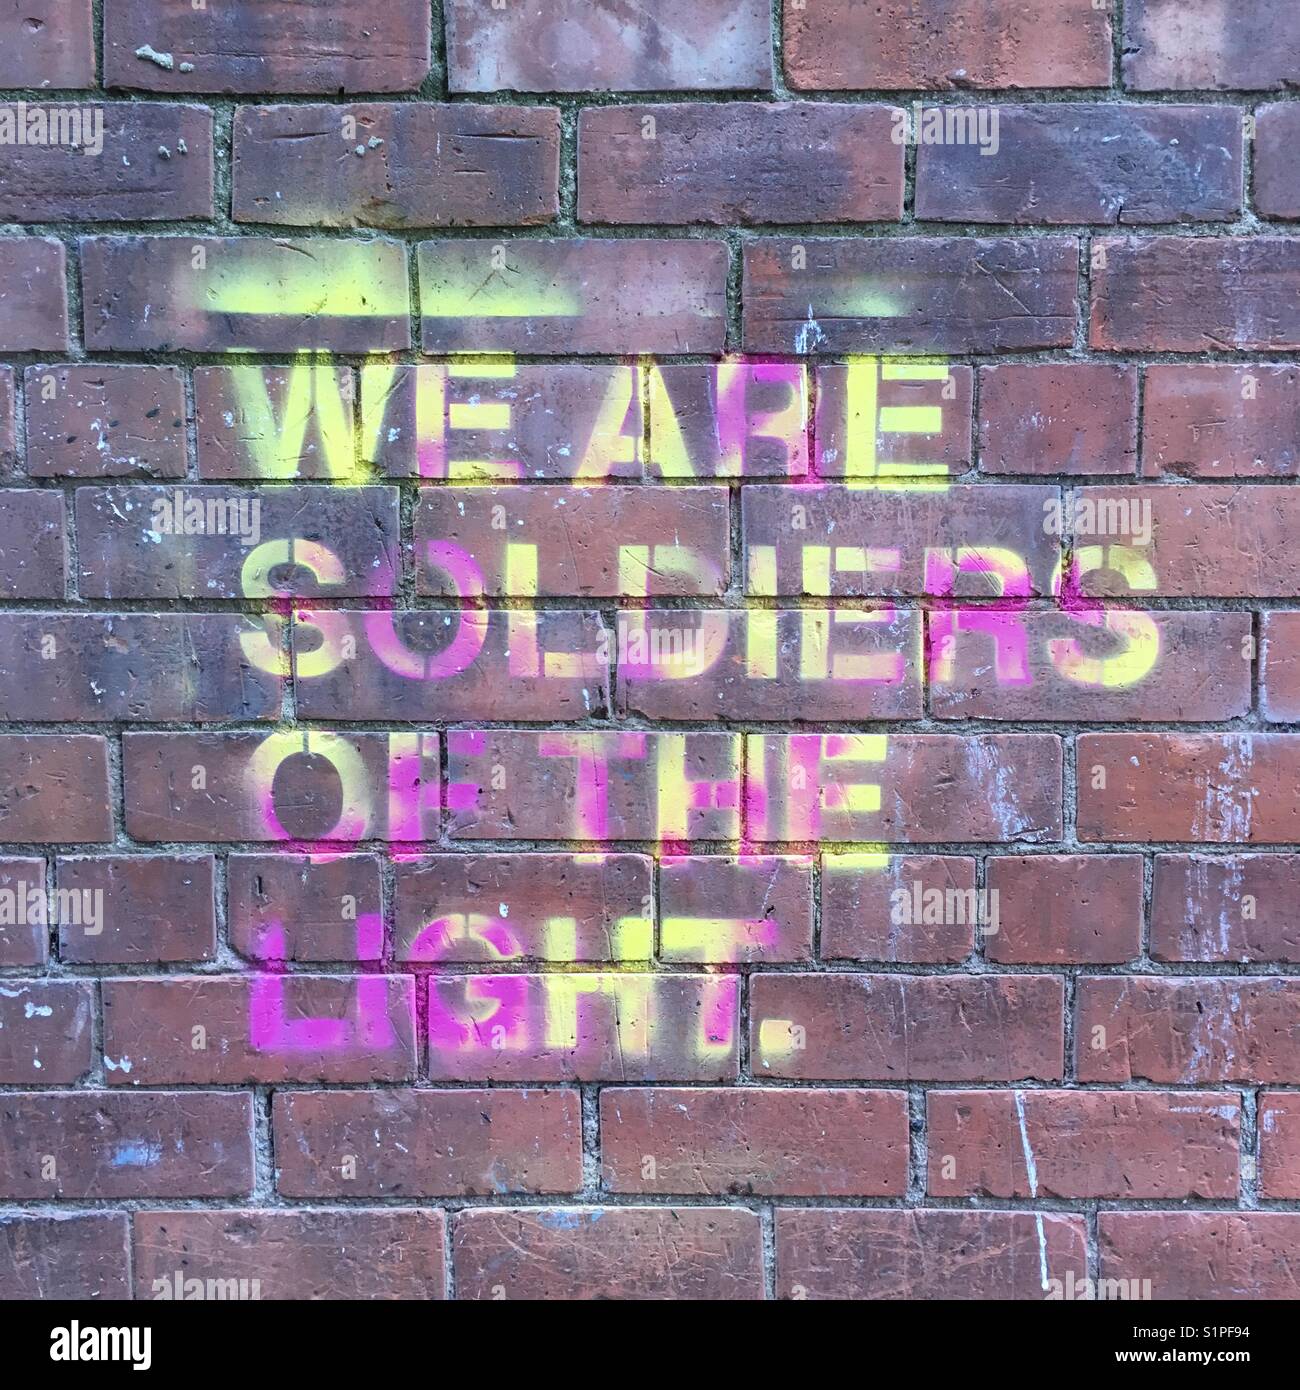 We Are Soldiers Of The Light - Hull City of Culture Stock Photo